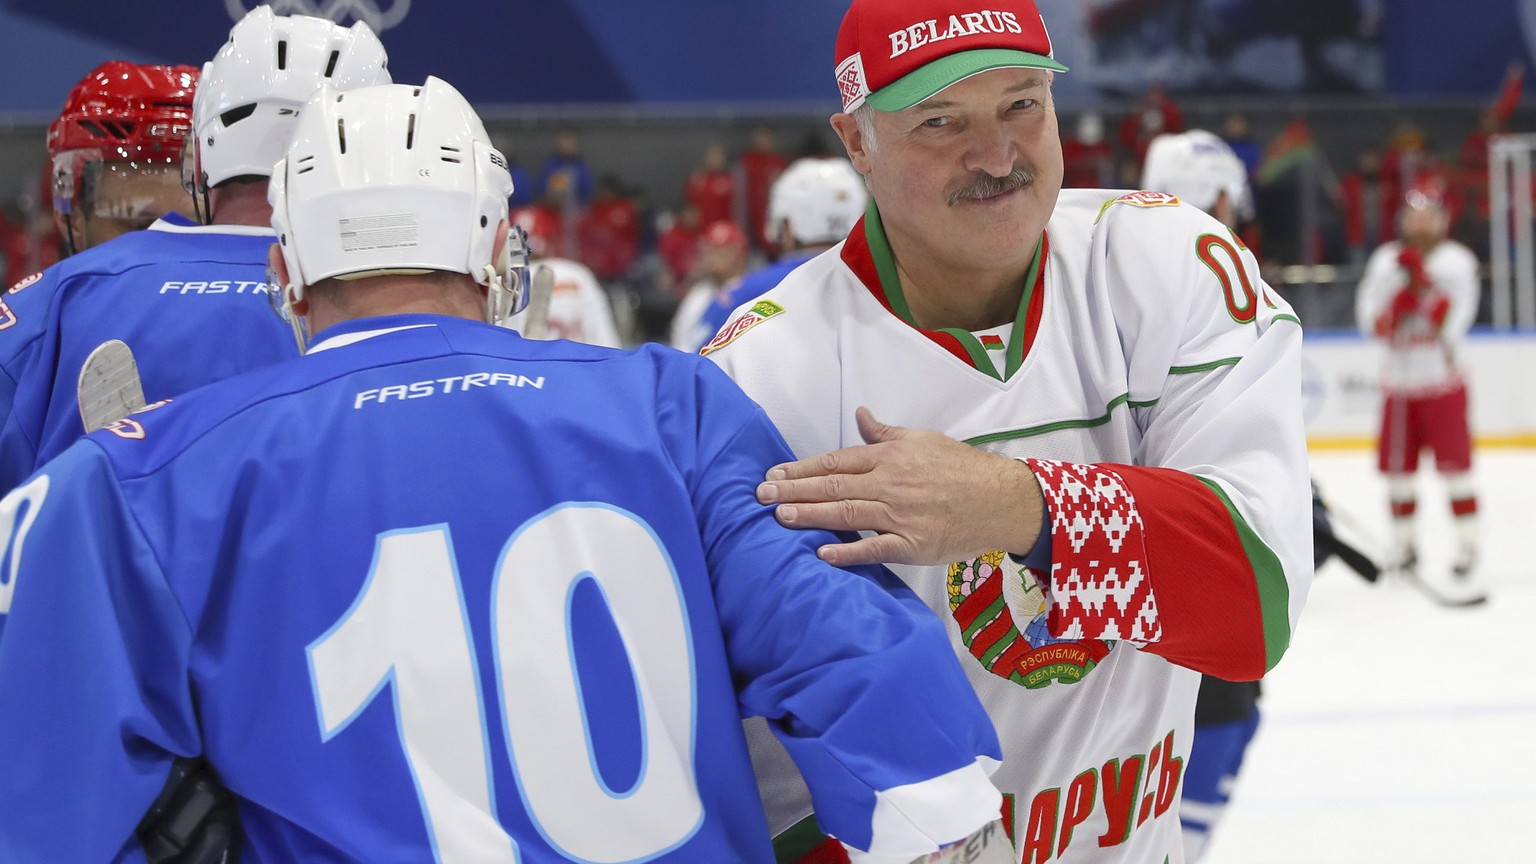 FILE In this file pool photo taken on Saturday, April 4, 2020, Belarusian President Alexander Lukashenko, right, takes part in a hockey match during Republican amateur competitions in Minsk, Belarus.  ...